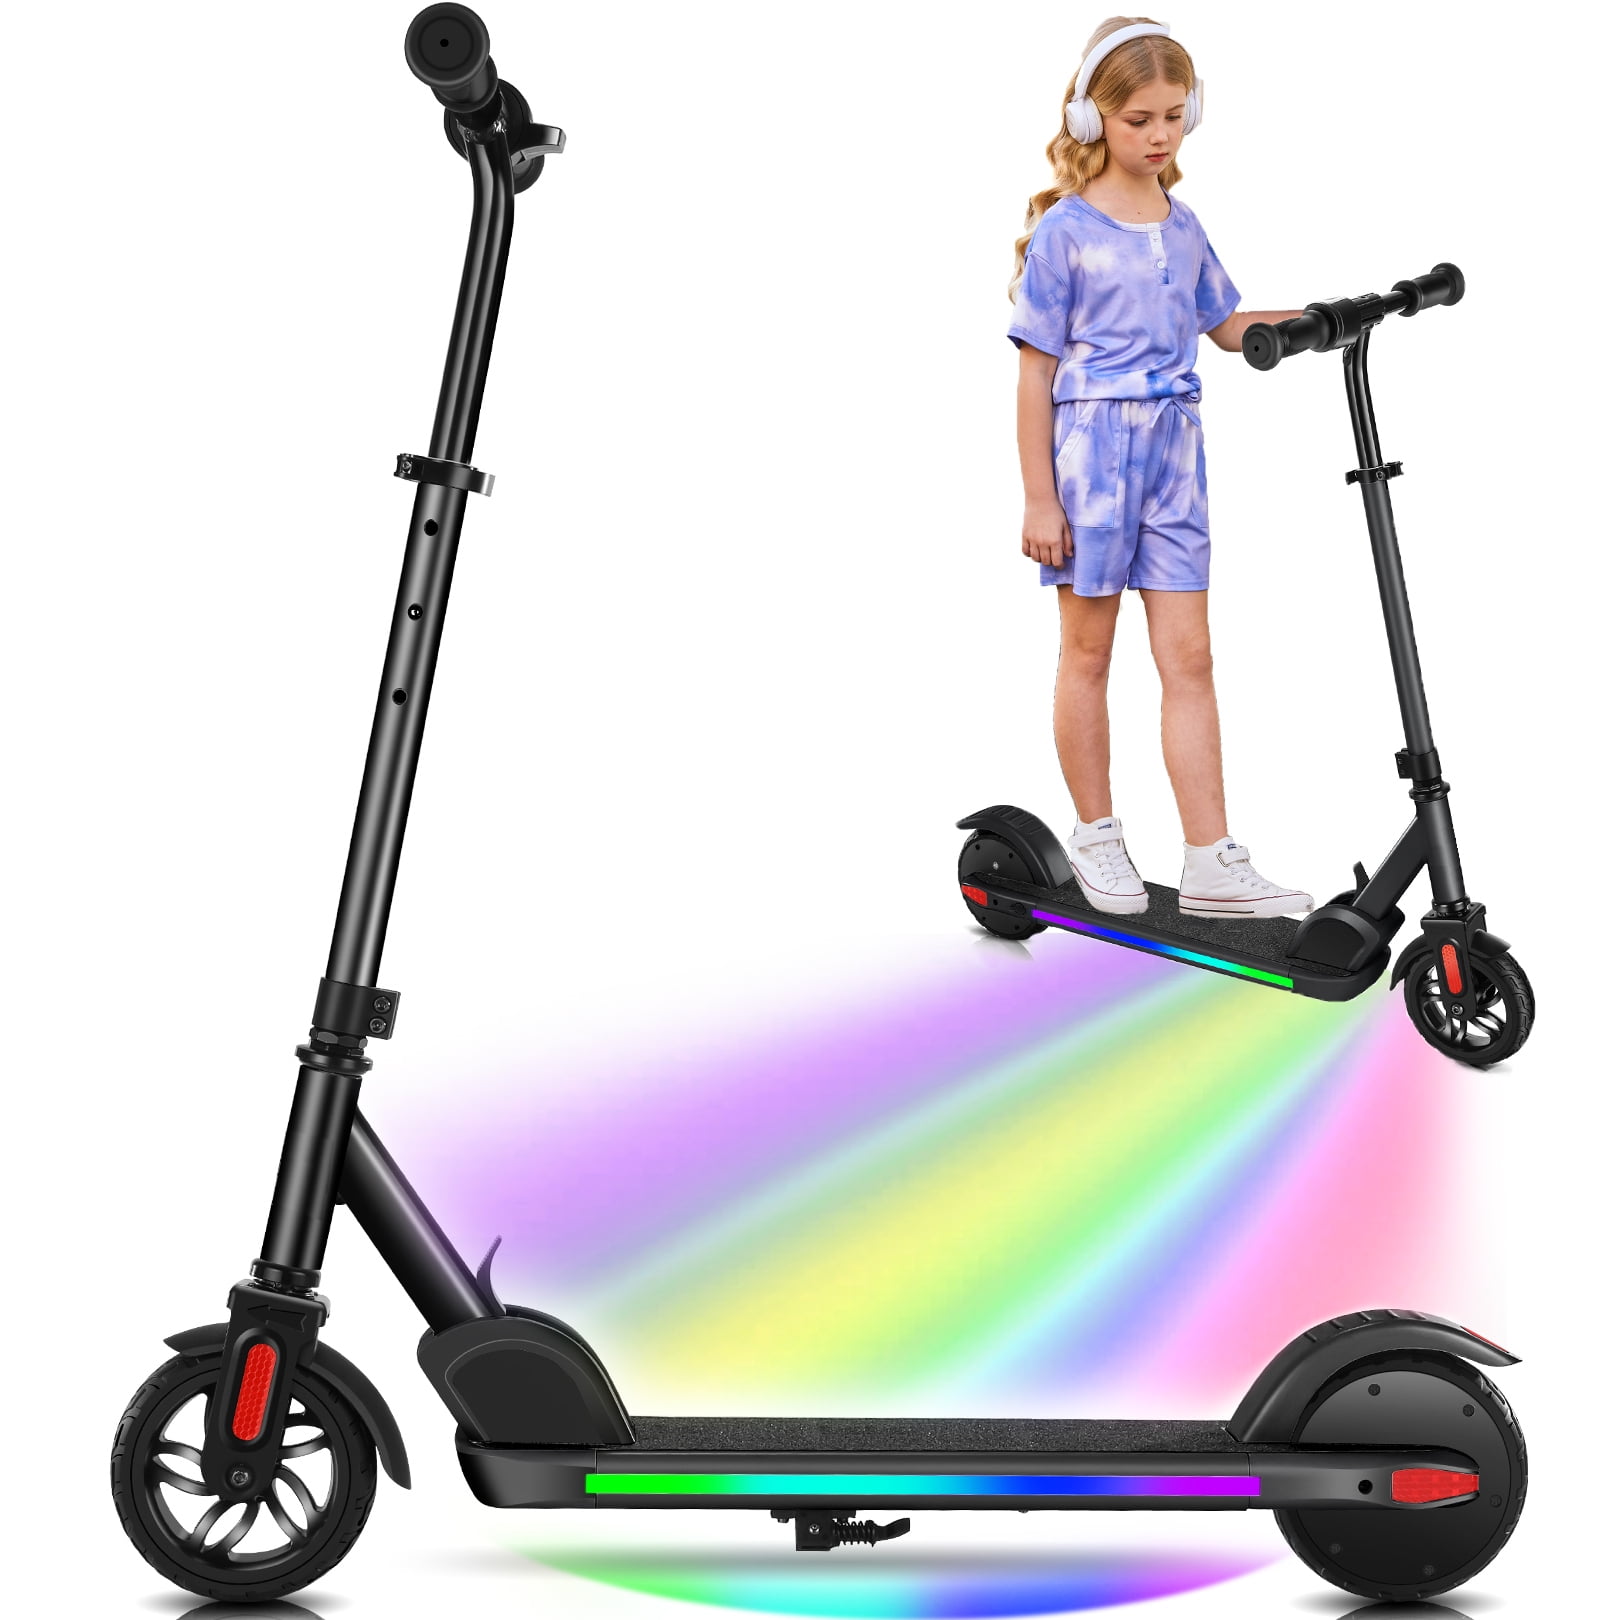 FAO Schwarz Kids LED Light-Up Spinner 3-Wheel Scooter Red White Striped  Kickstart Razor with Adjustable Height Fun Activity for Outdoor Day/Night  Play